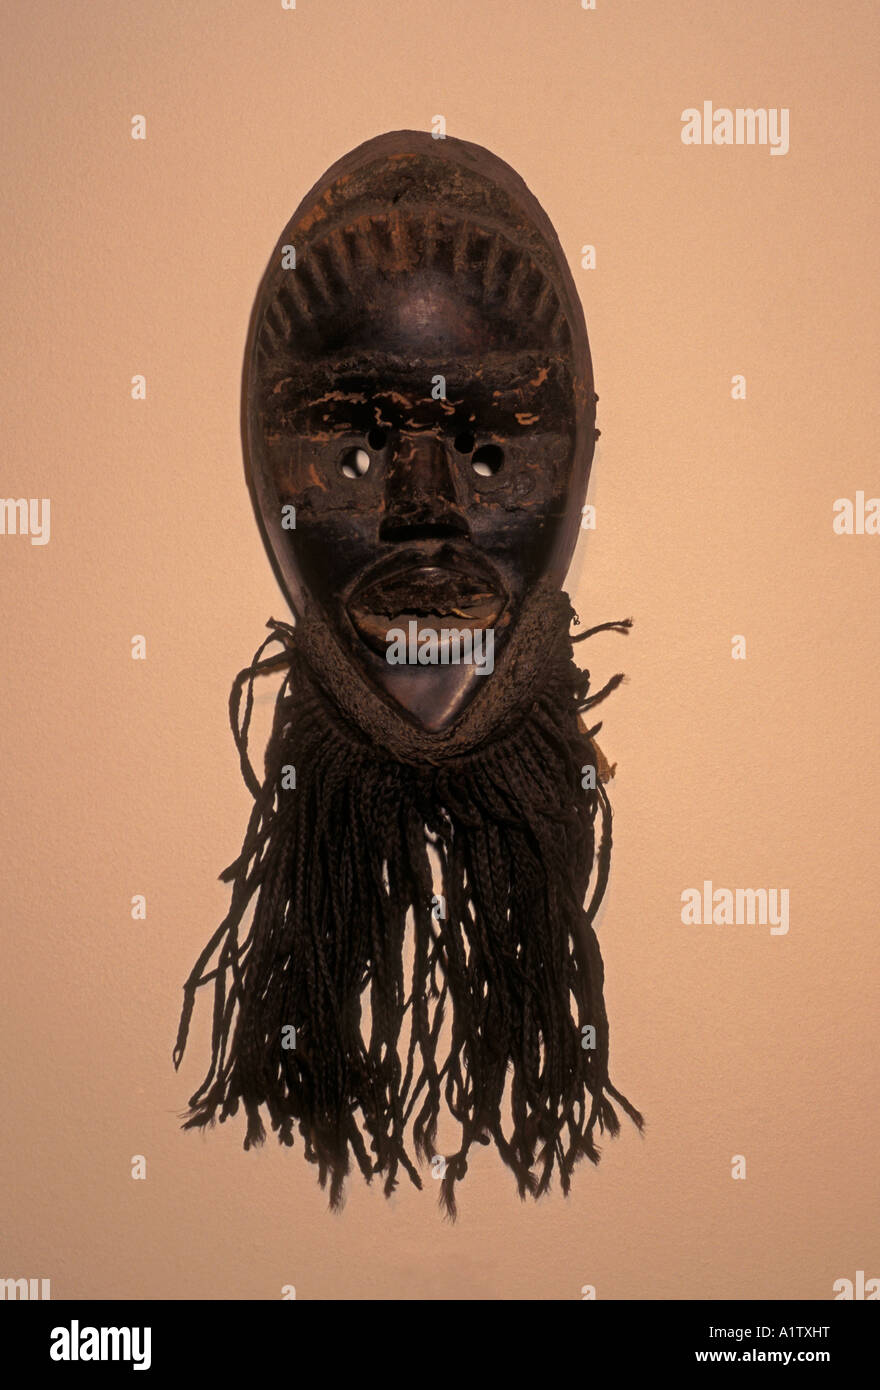 dance mask, mask, made of wood and hair, 24x15x8 cm, National Gallery, city of Harare, Harare, Zimbabwe, Africa Stock Photo